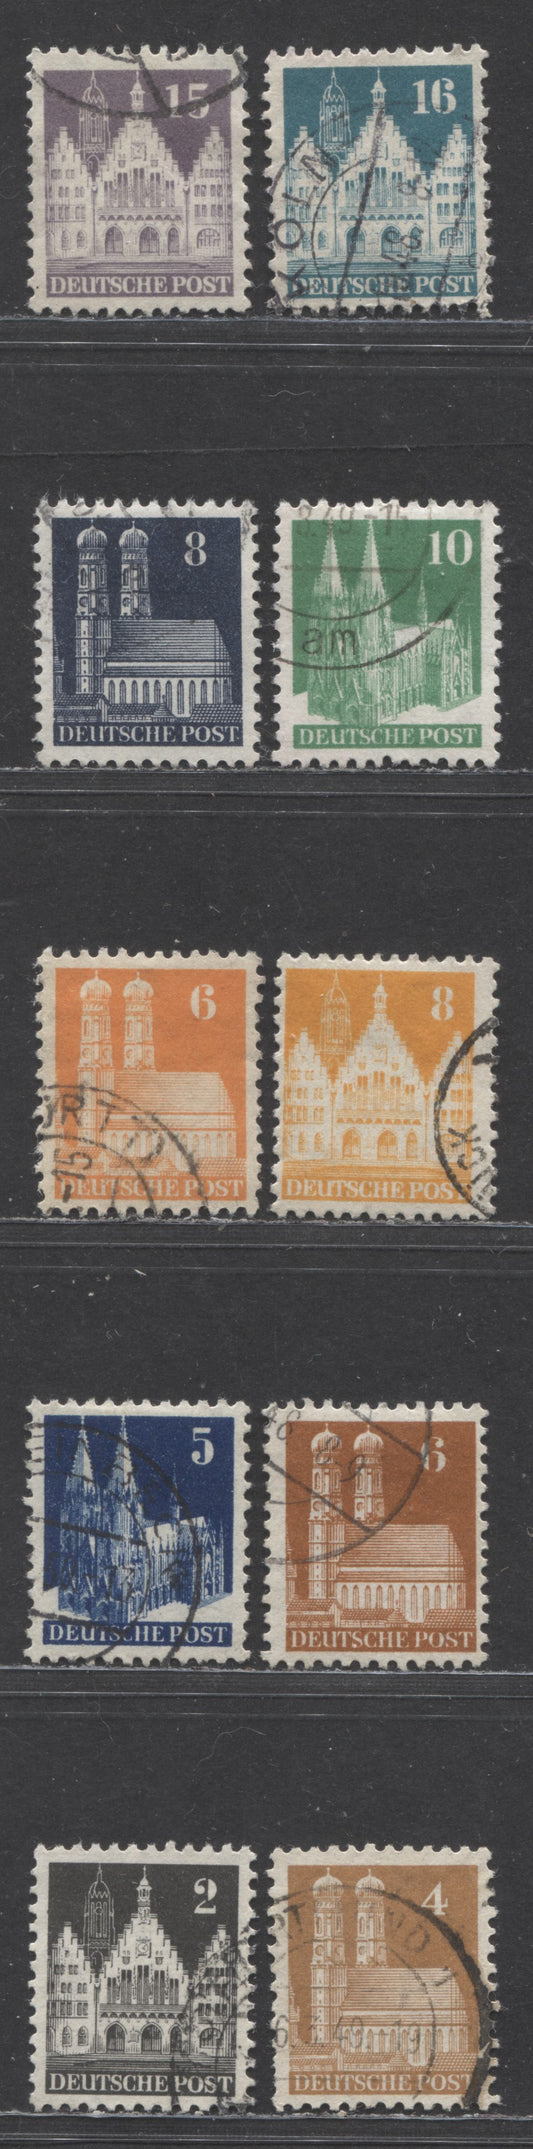 Lot 308 Germany - American and British Zone MI#73WB (634)/83WF (644) 1948-1951 Buildings Issue, Comb Perf 11.25 x 11, Wmk W, 10 Very Fine Used Singles, 2023 Michel Cat. € 7.5